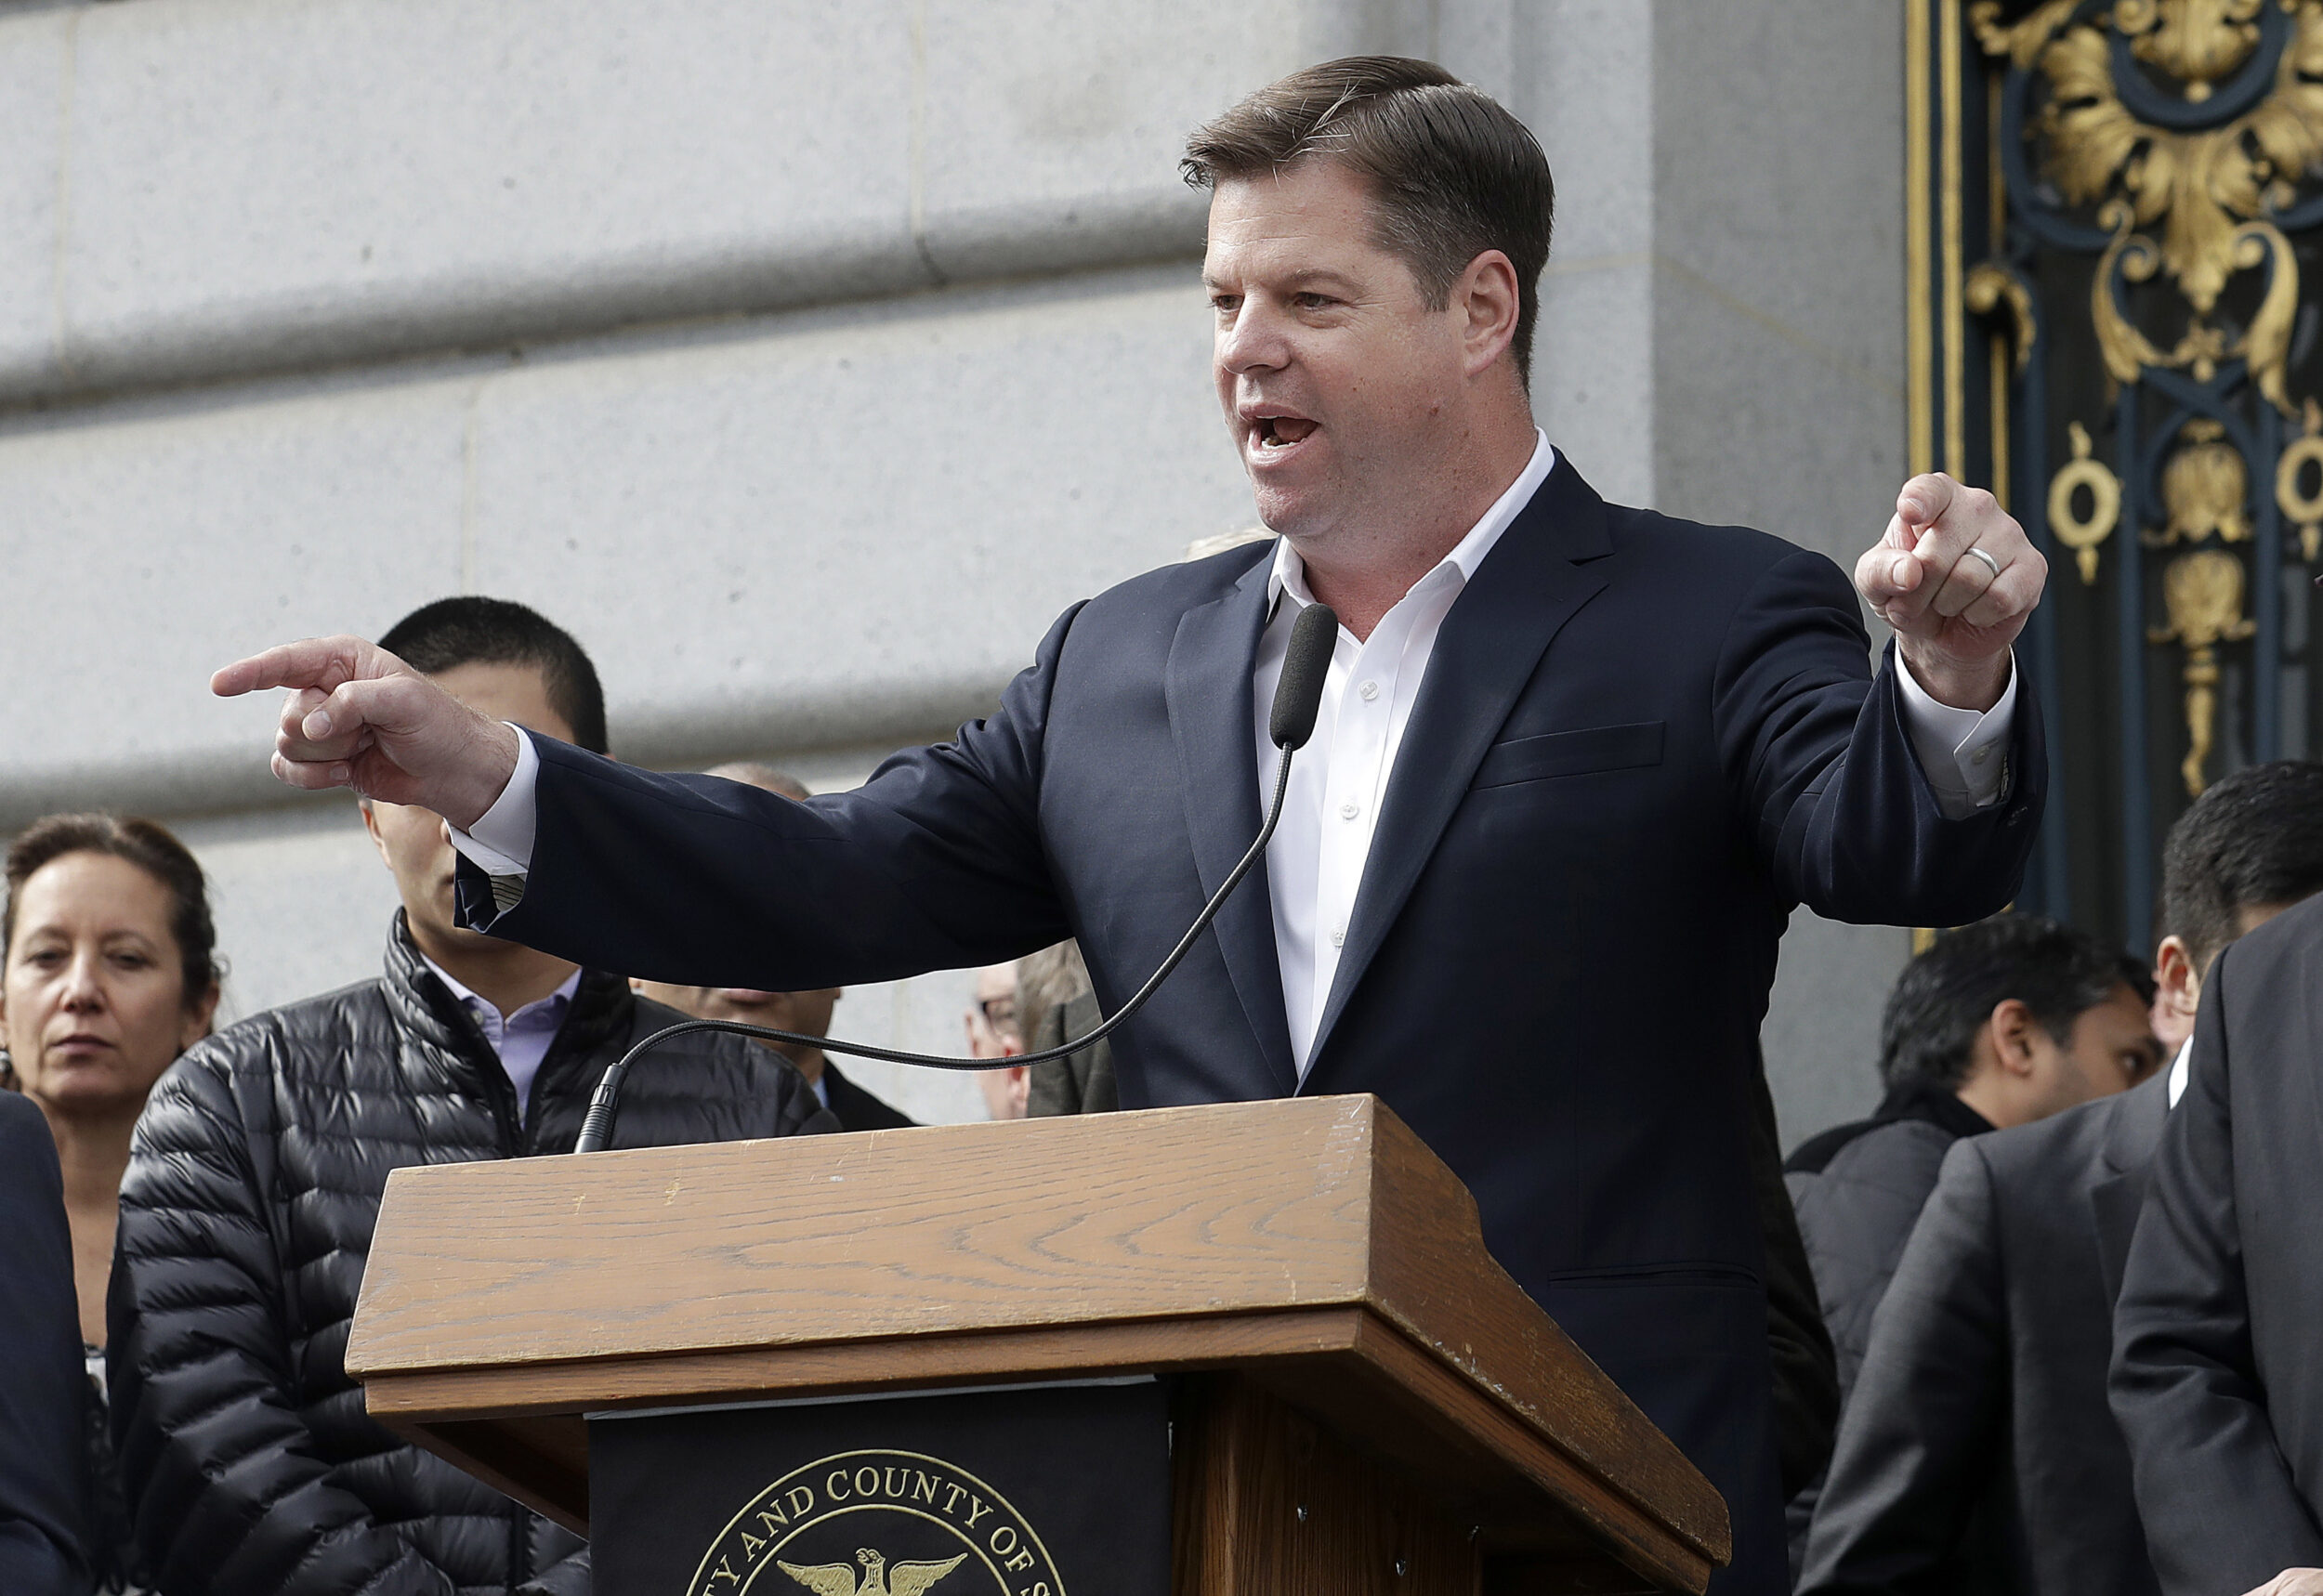 A man in a suit gestures emphatically at a podium with microphones, flanked by onlookers.